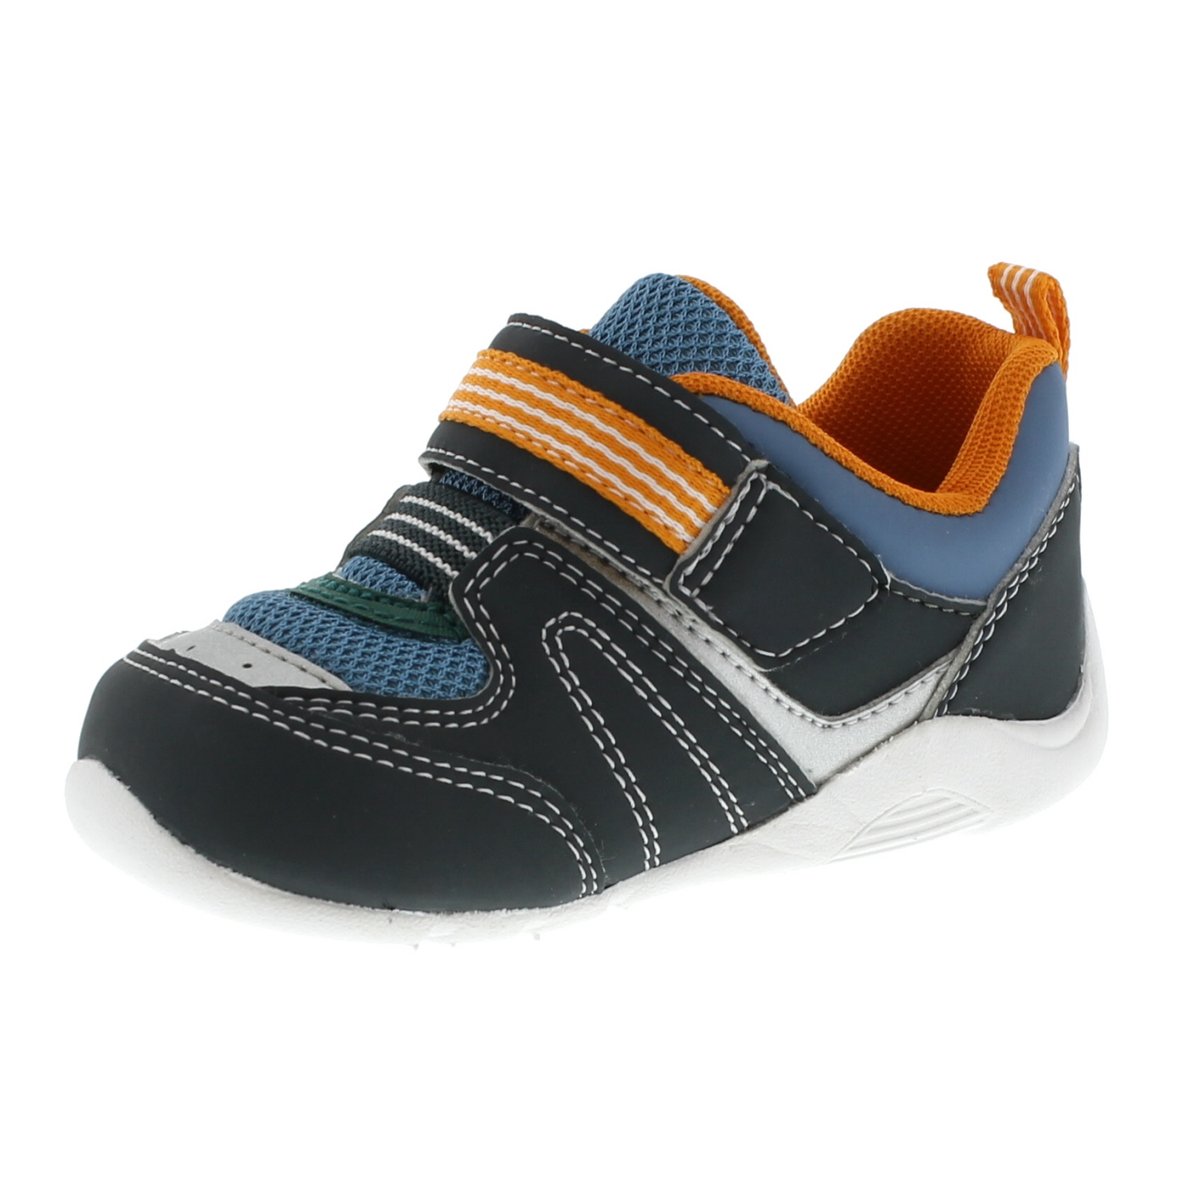 Baby Tsukihoshi Neko Sneaker in Charcoal/Sea from the front view